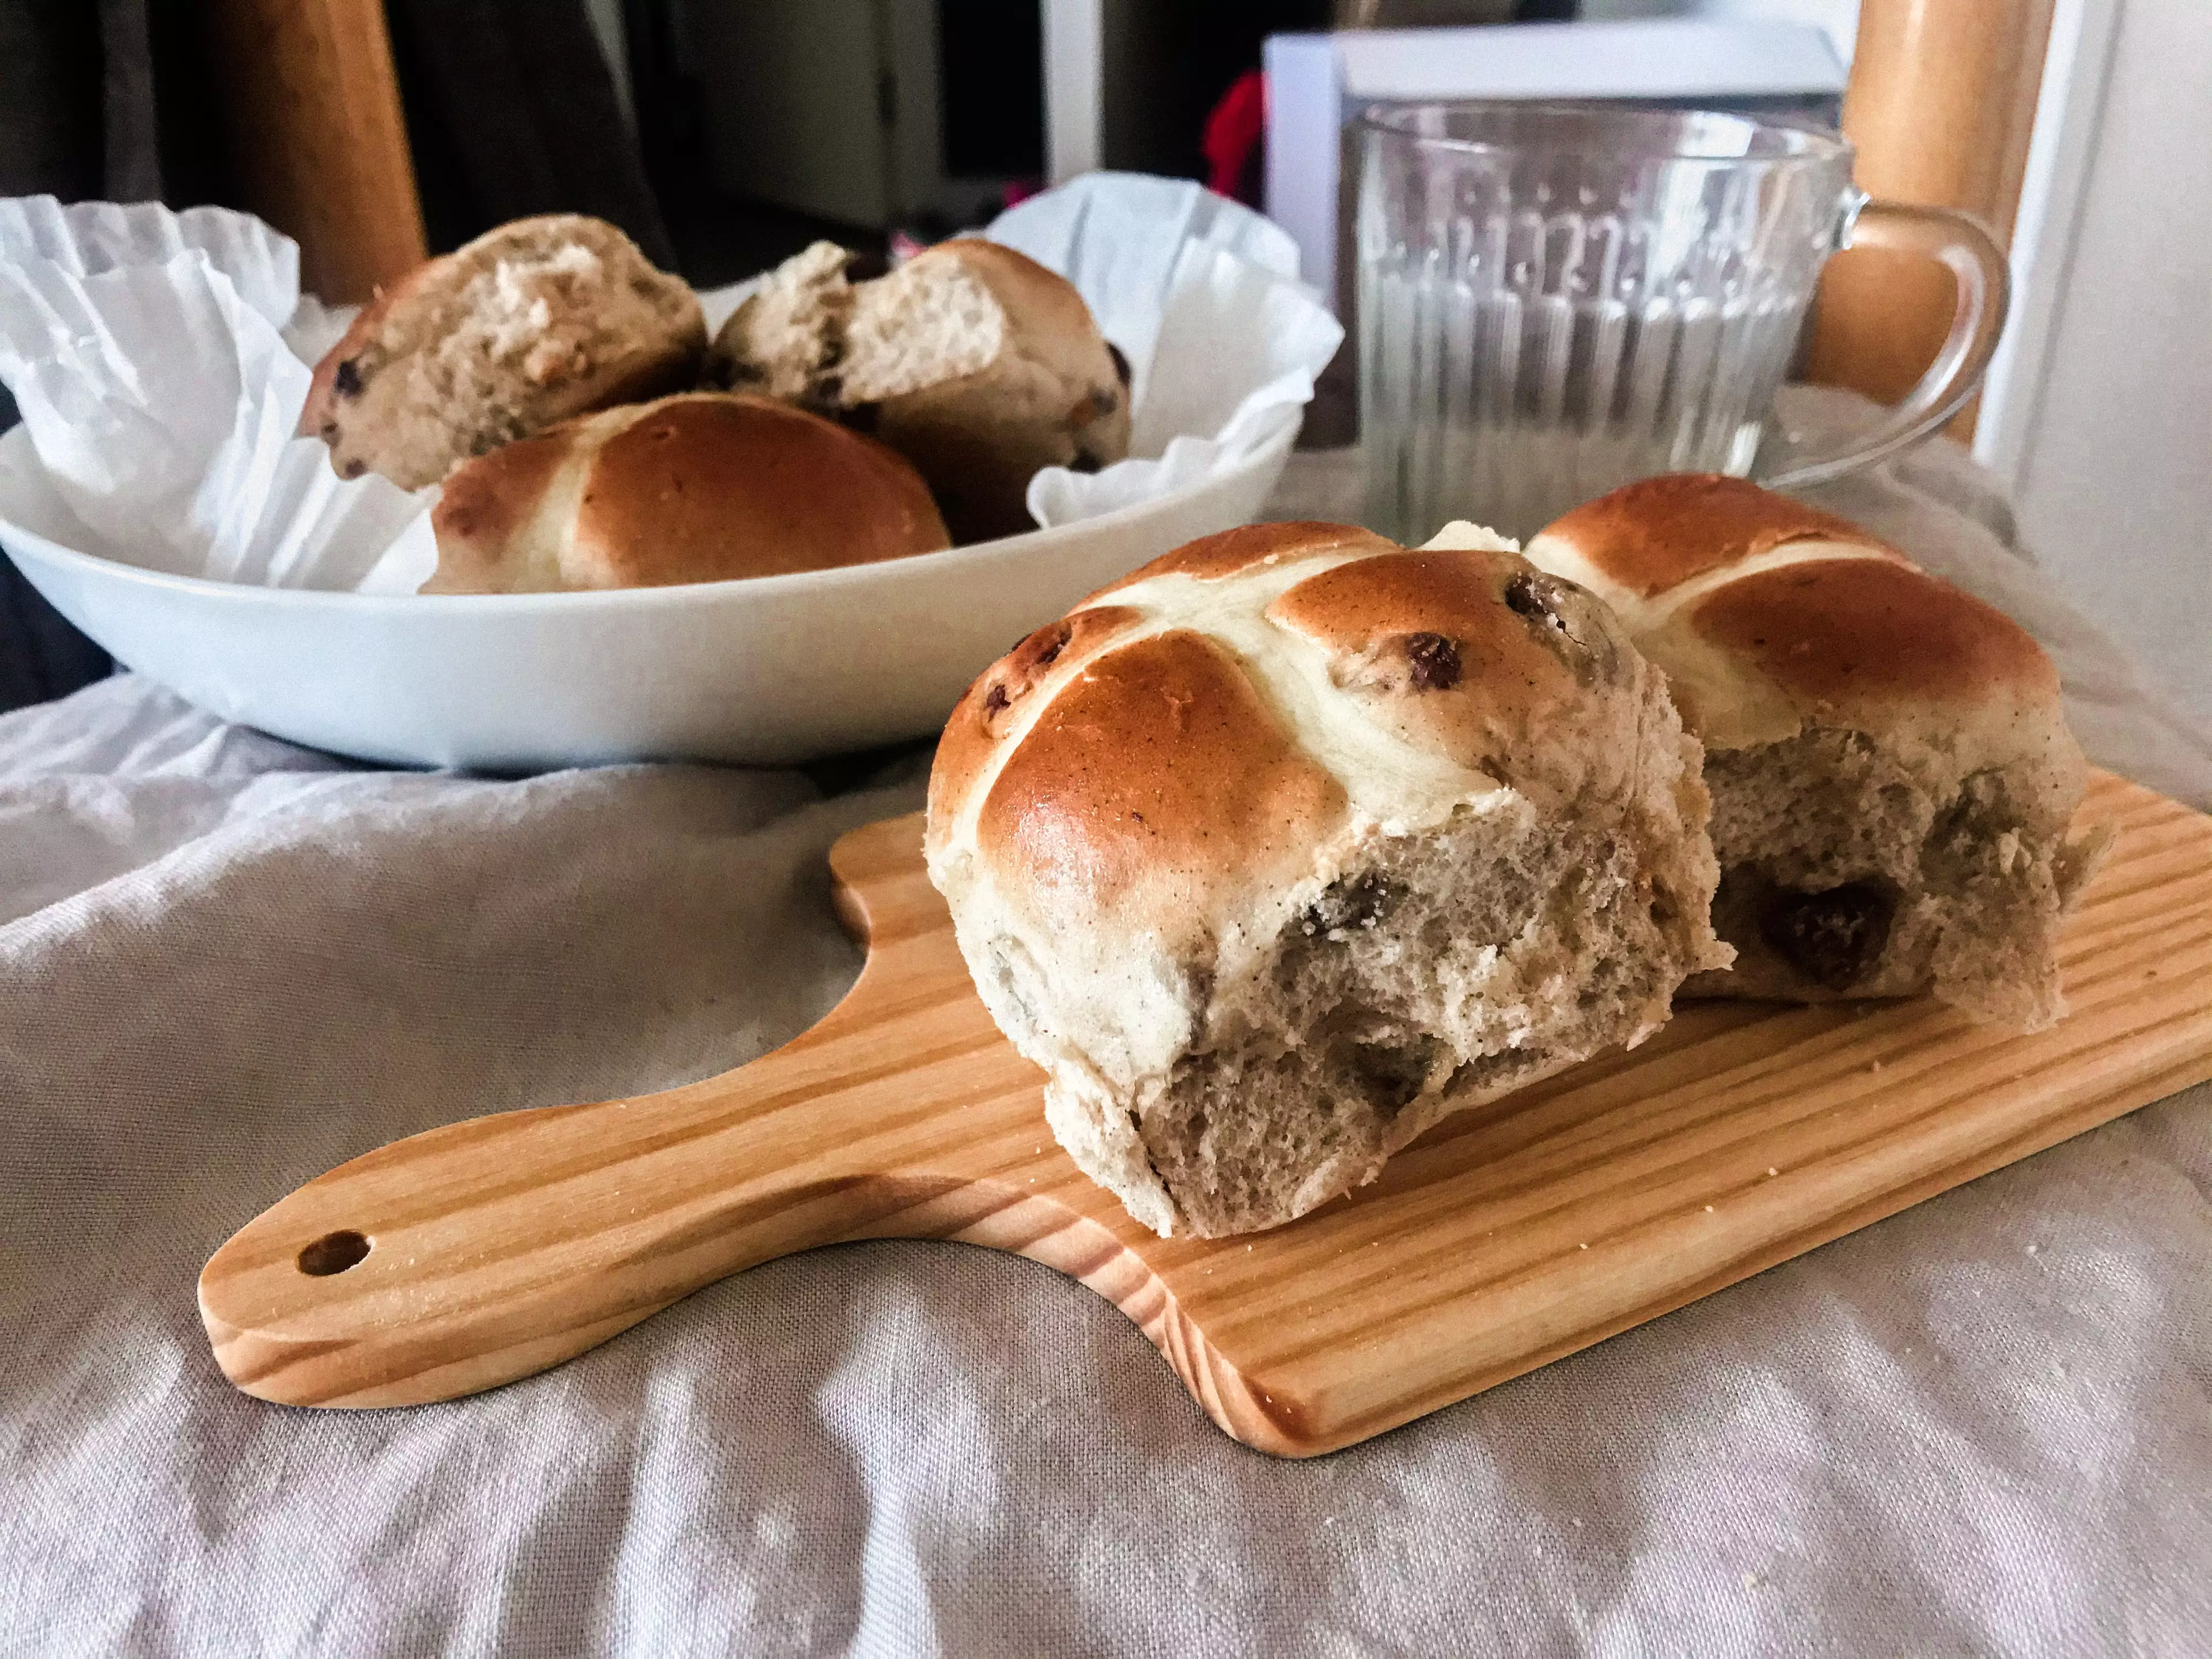 Hot cross buns are typically eaten on Good Friday and are made with spices and currants (